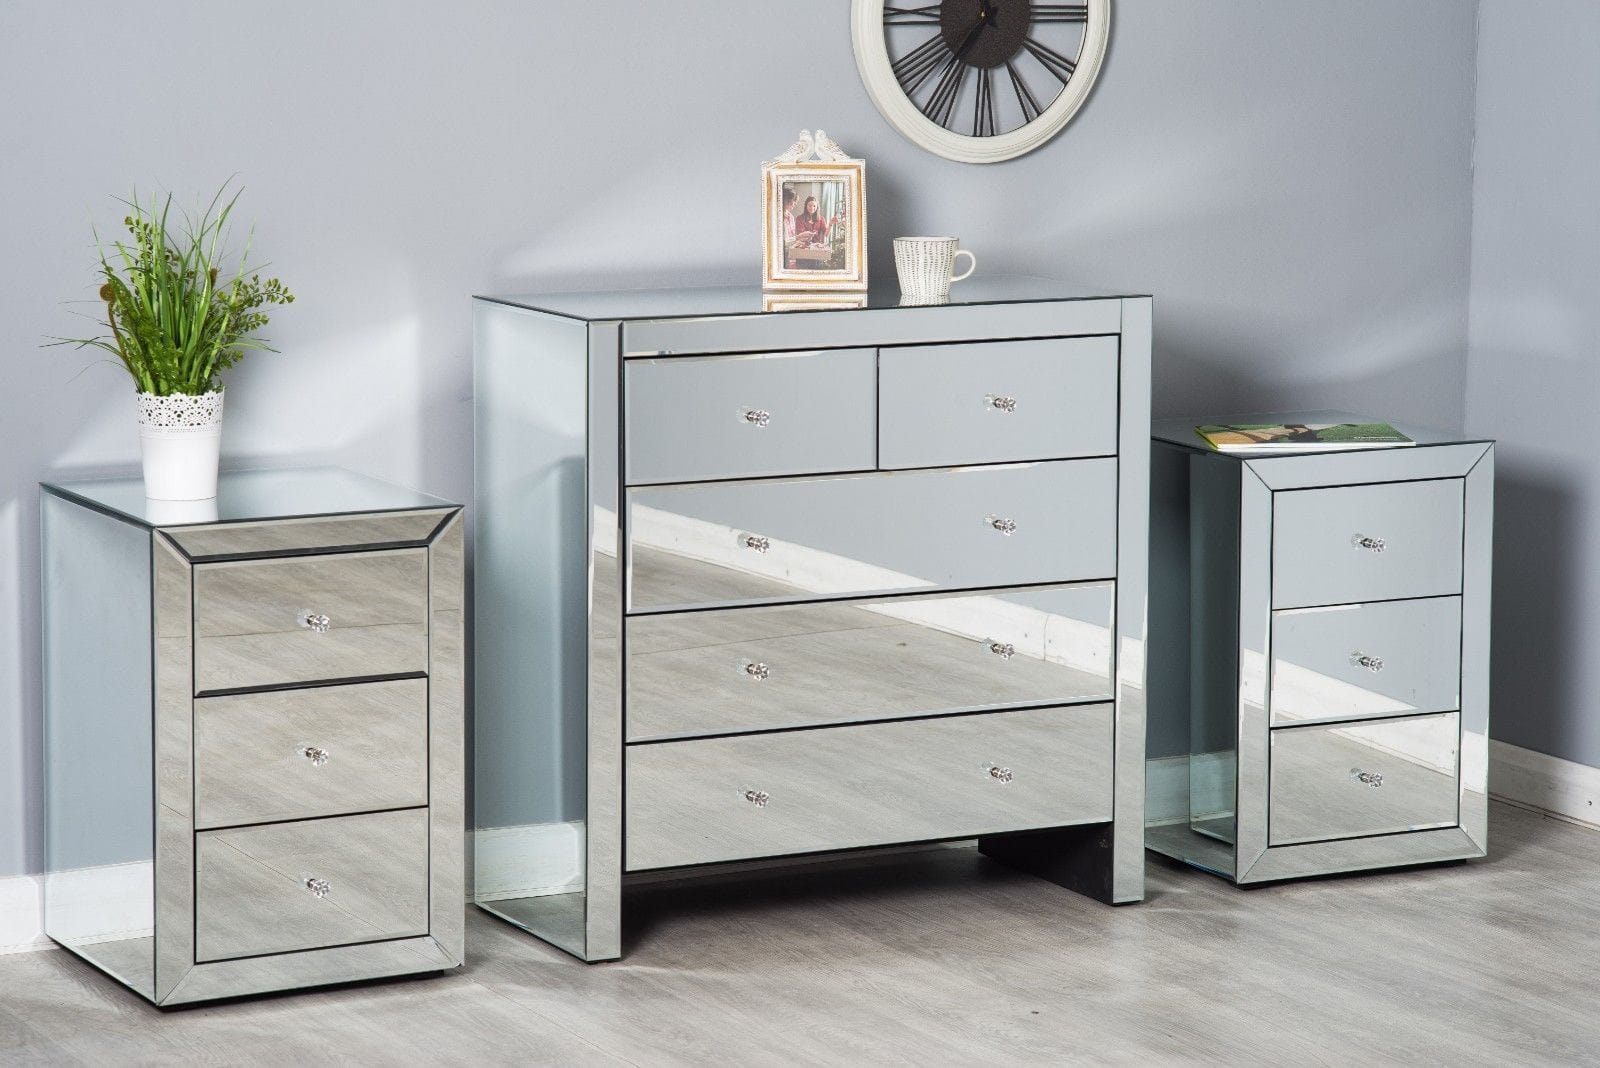 Mirrored Glass 3 Piece Drawer Bedroom Set | Furniture Maxi